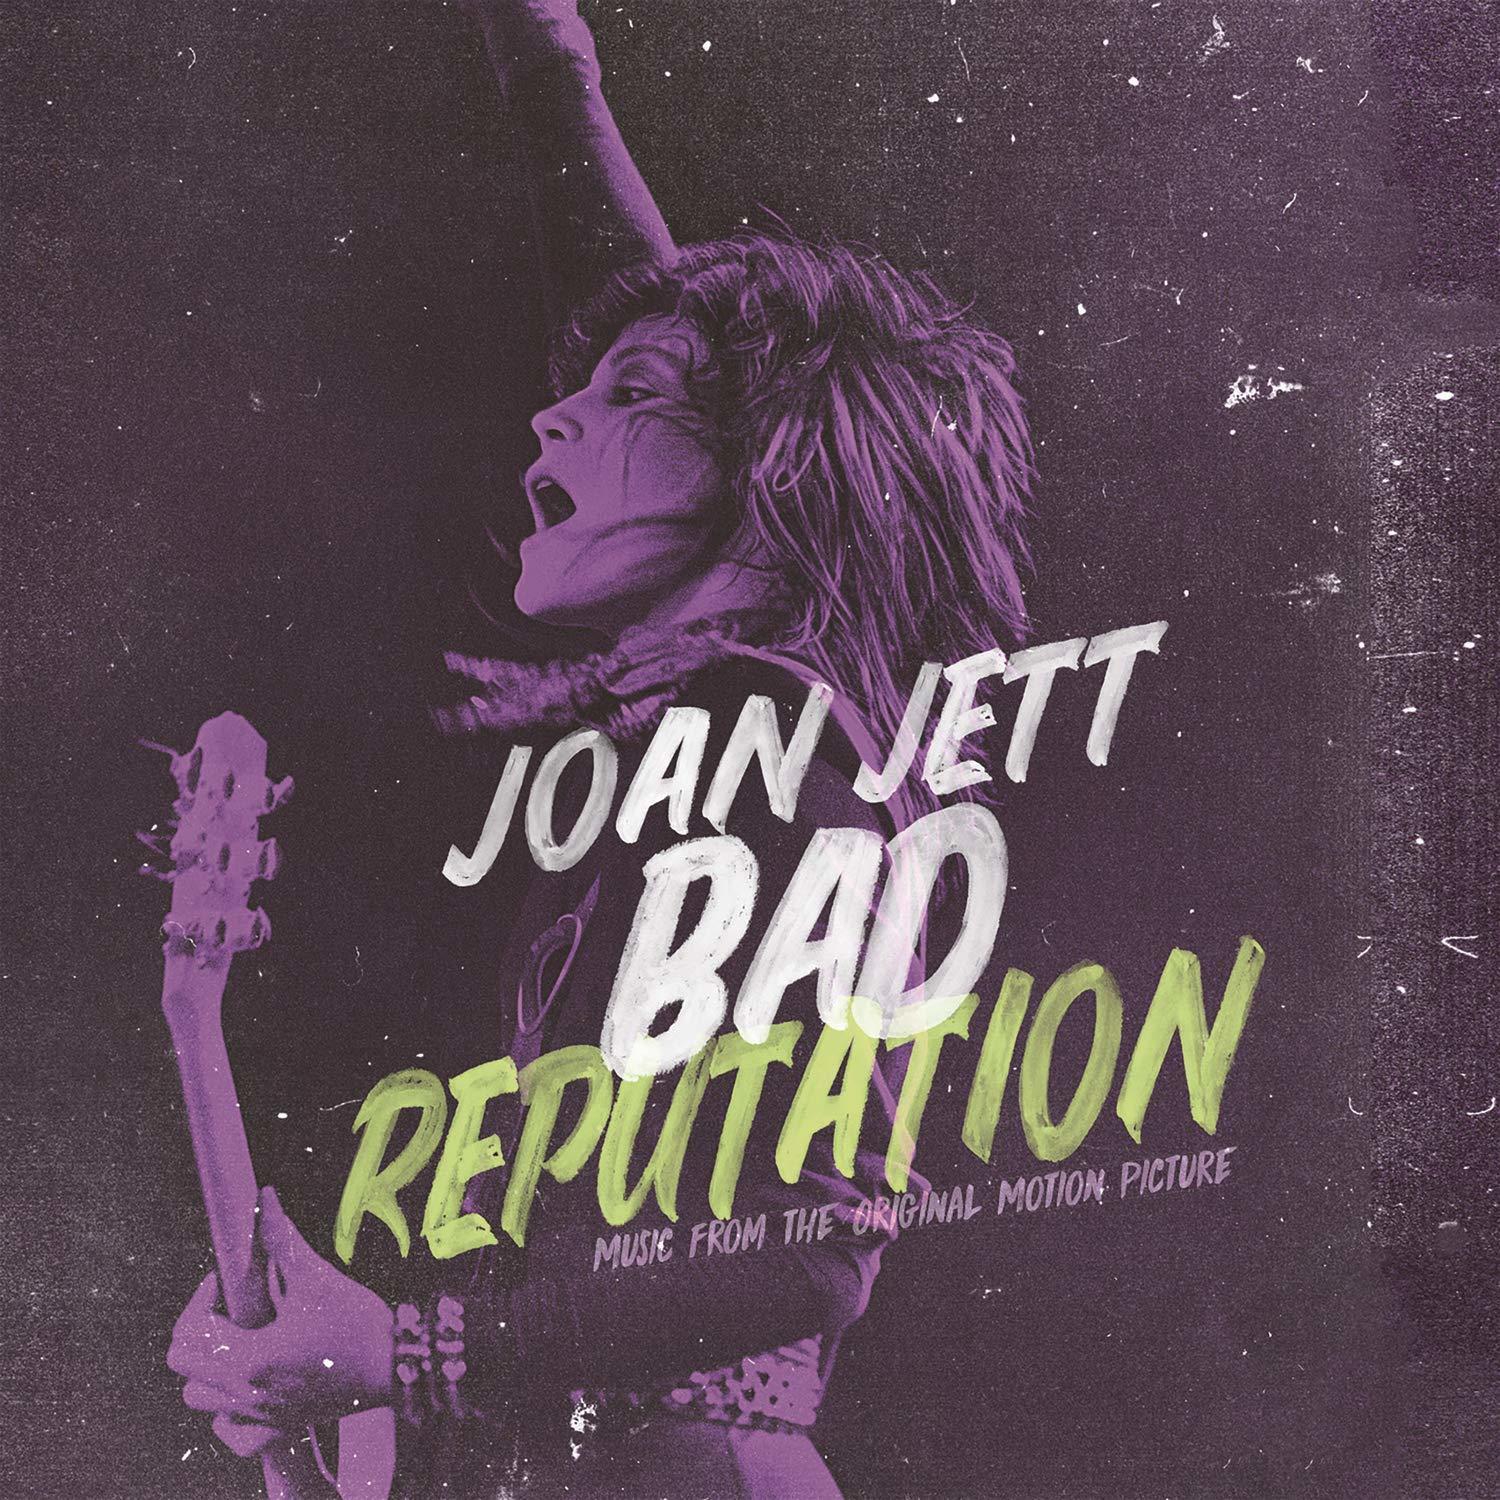 Bad Reputation (Music From The Original Motion Picture) by Joan Jett (CD)